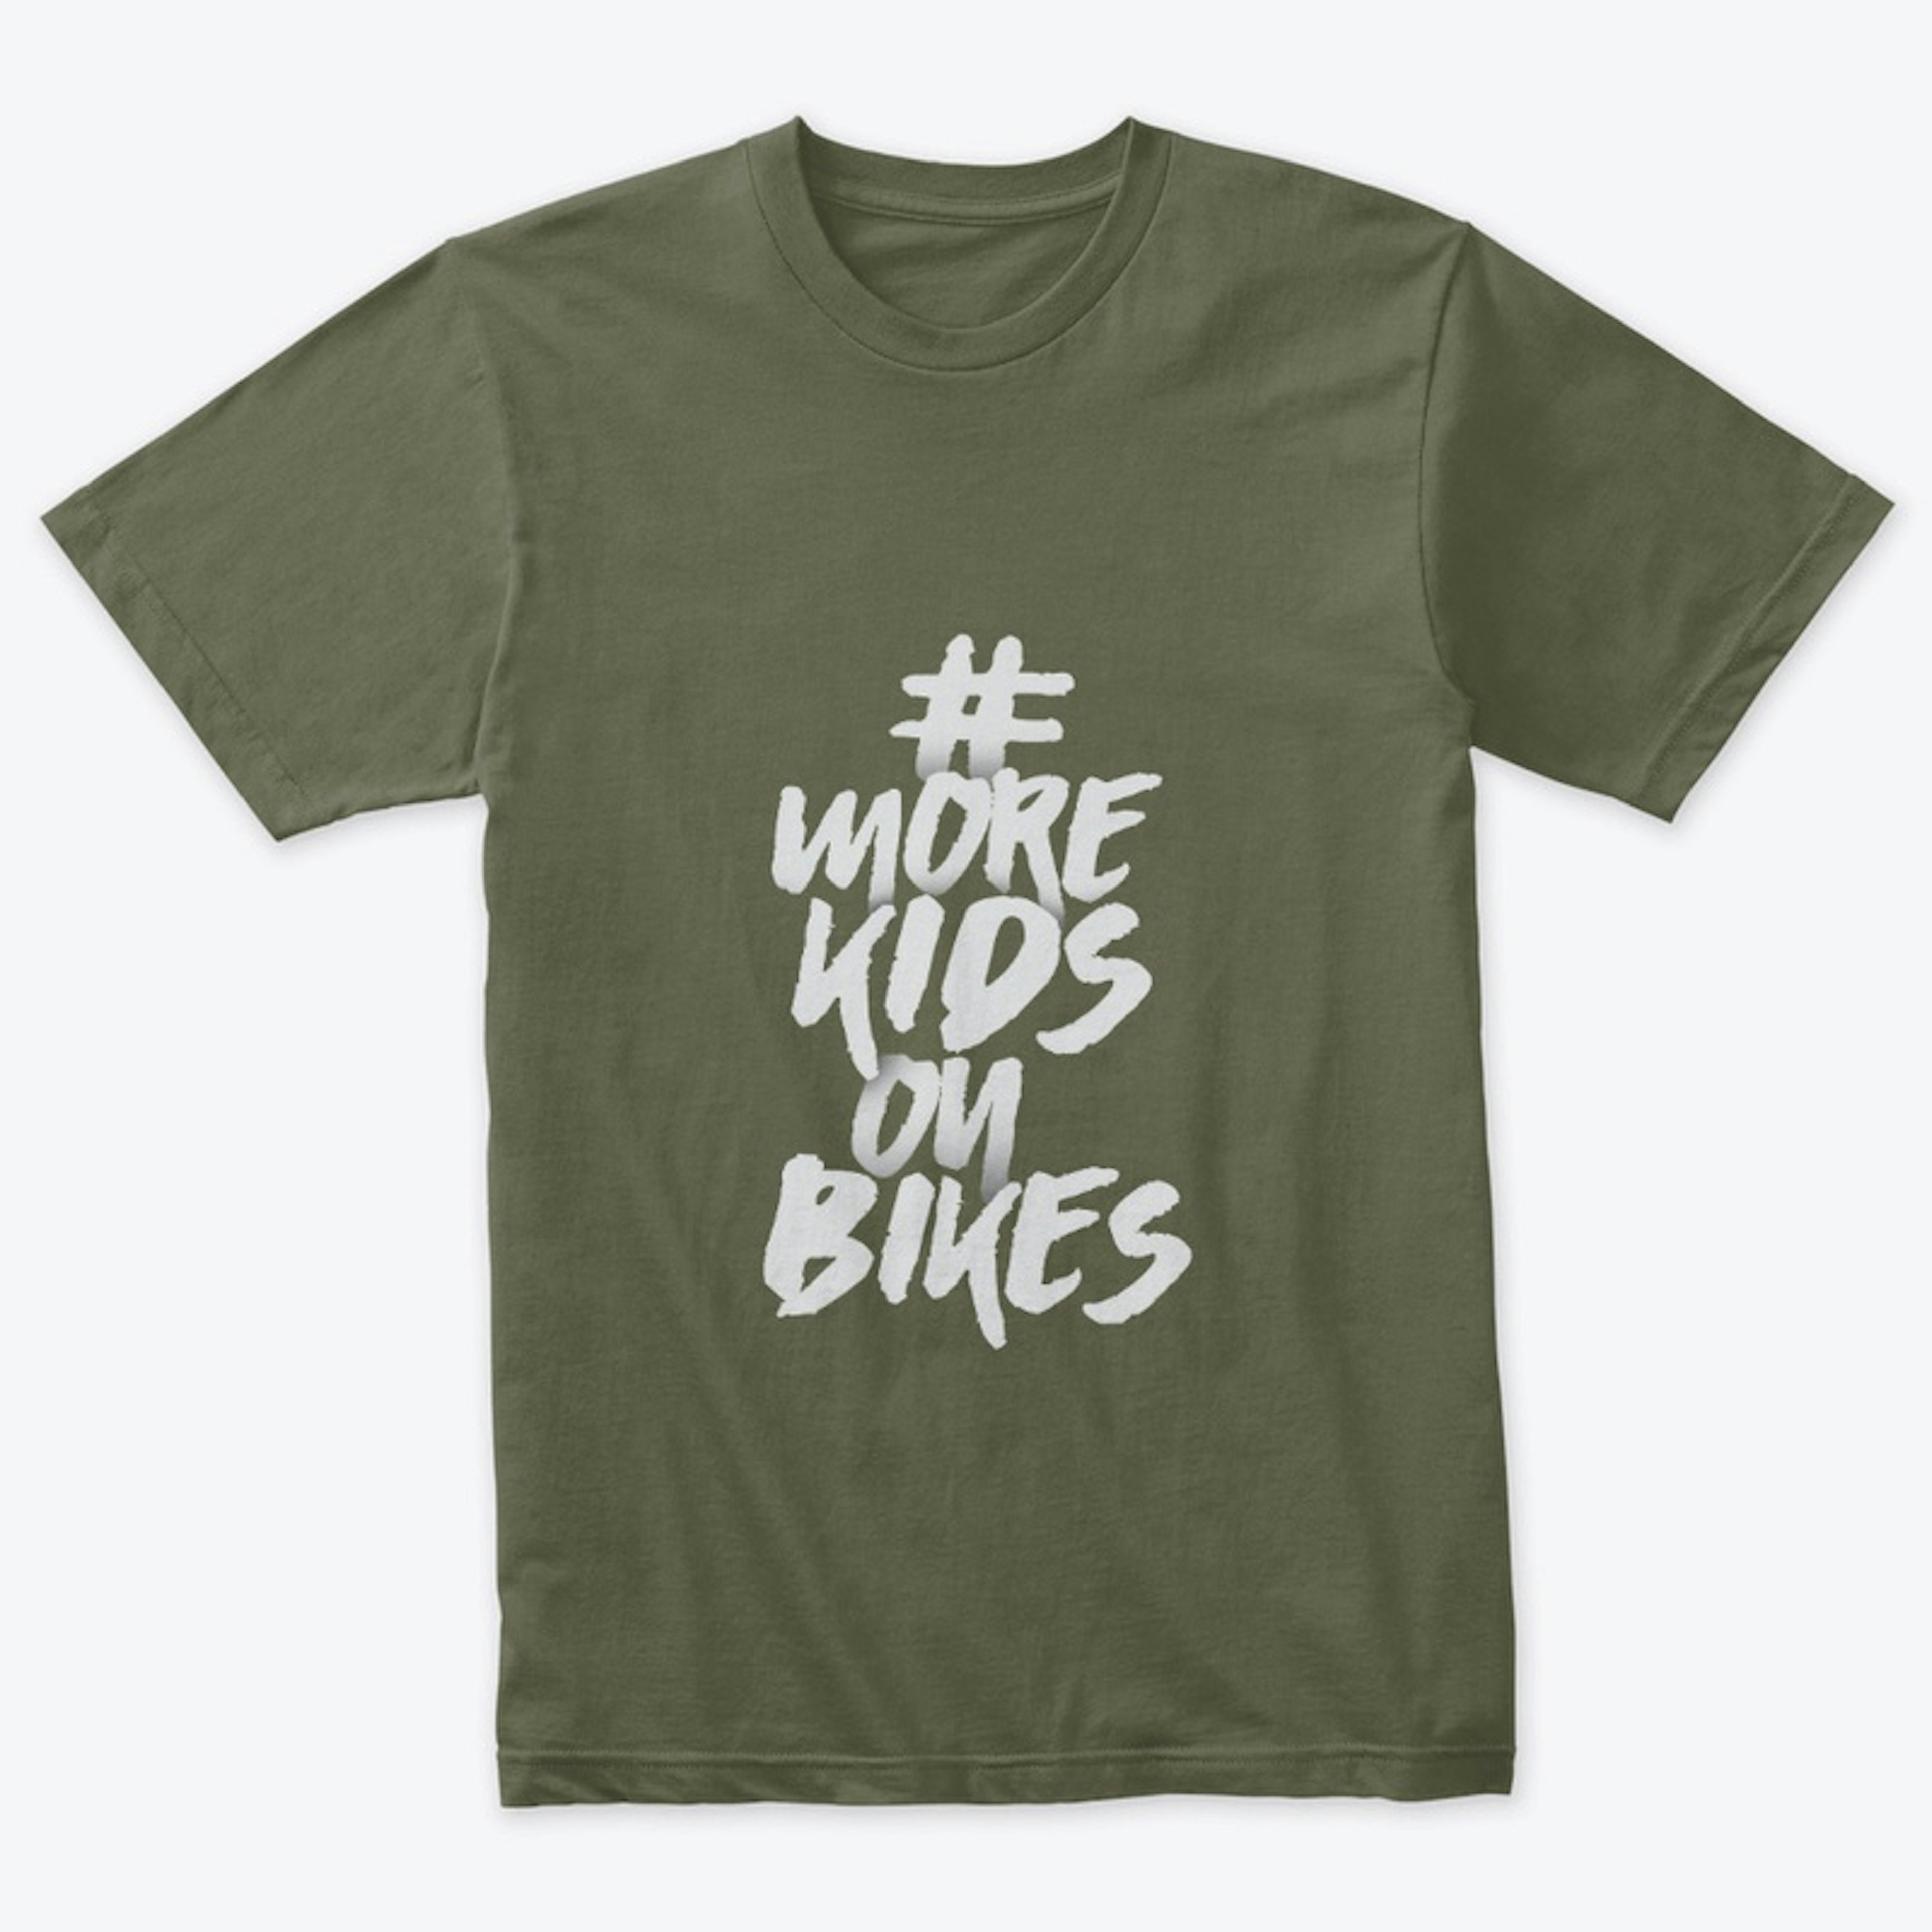 This Shirt Gets More Kids On Bikes